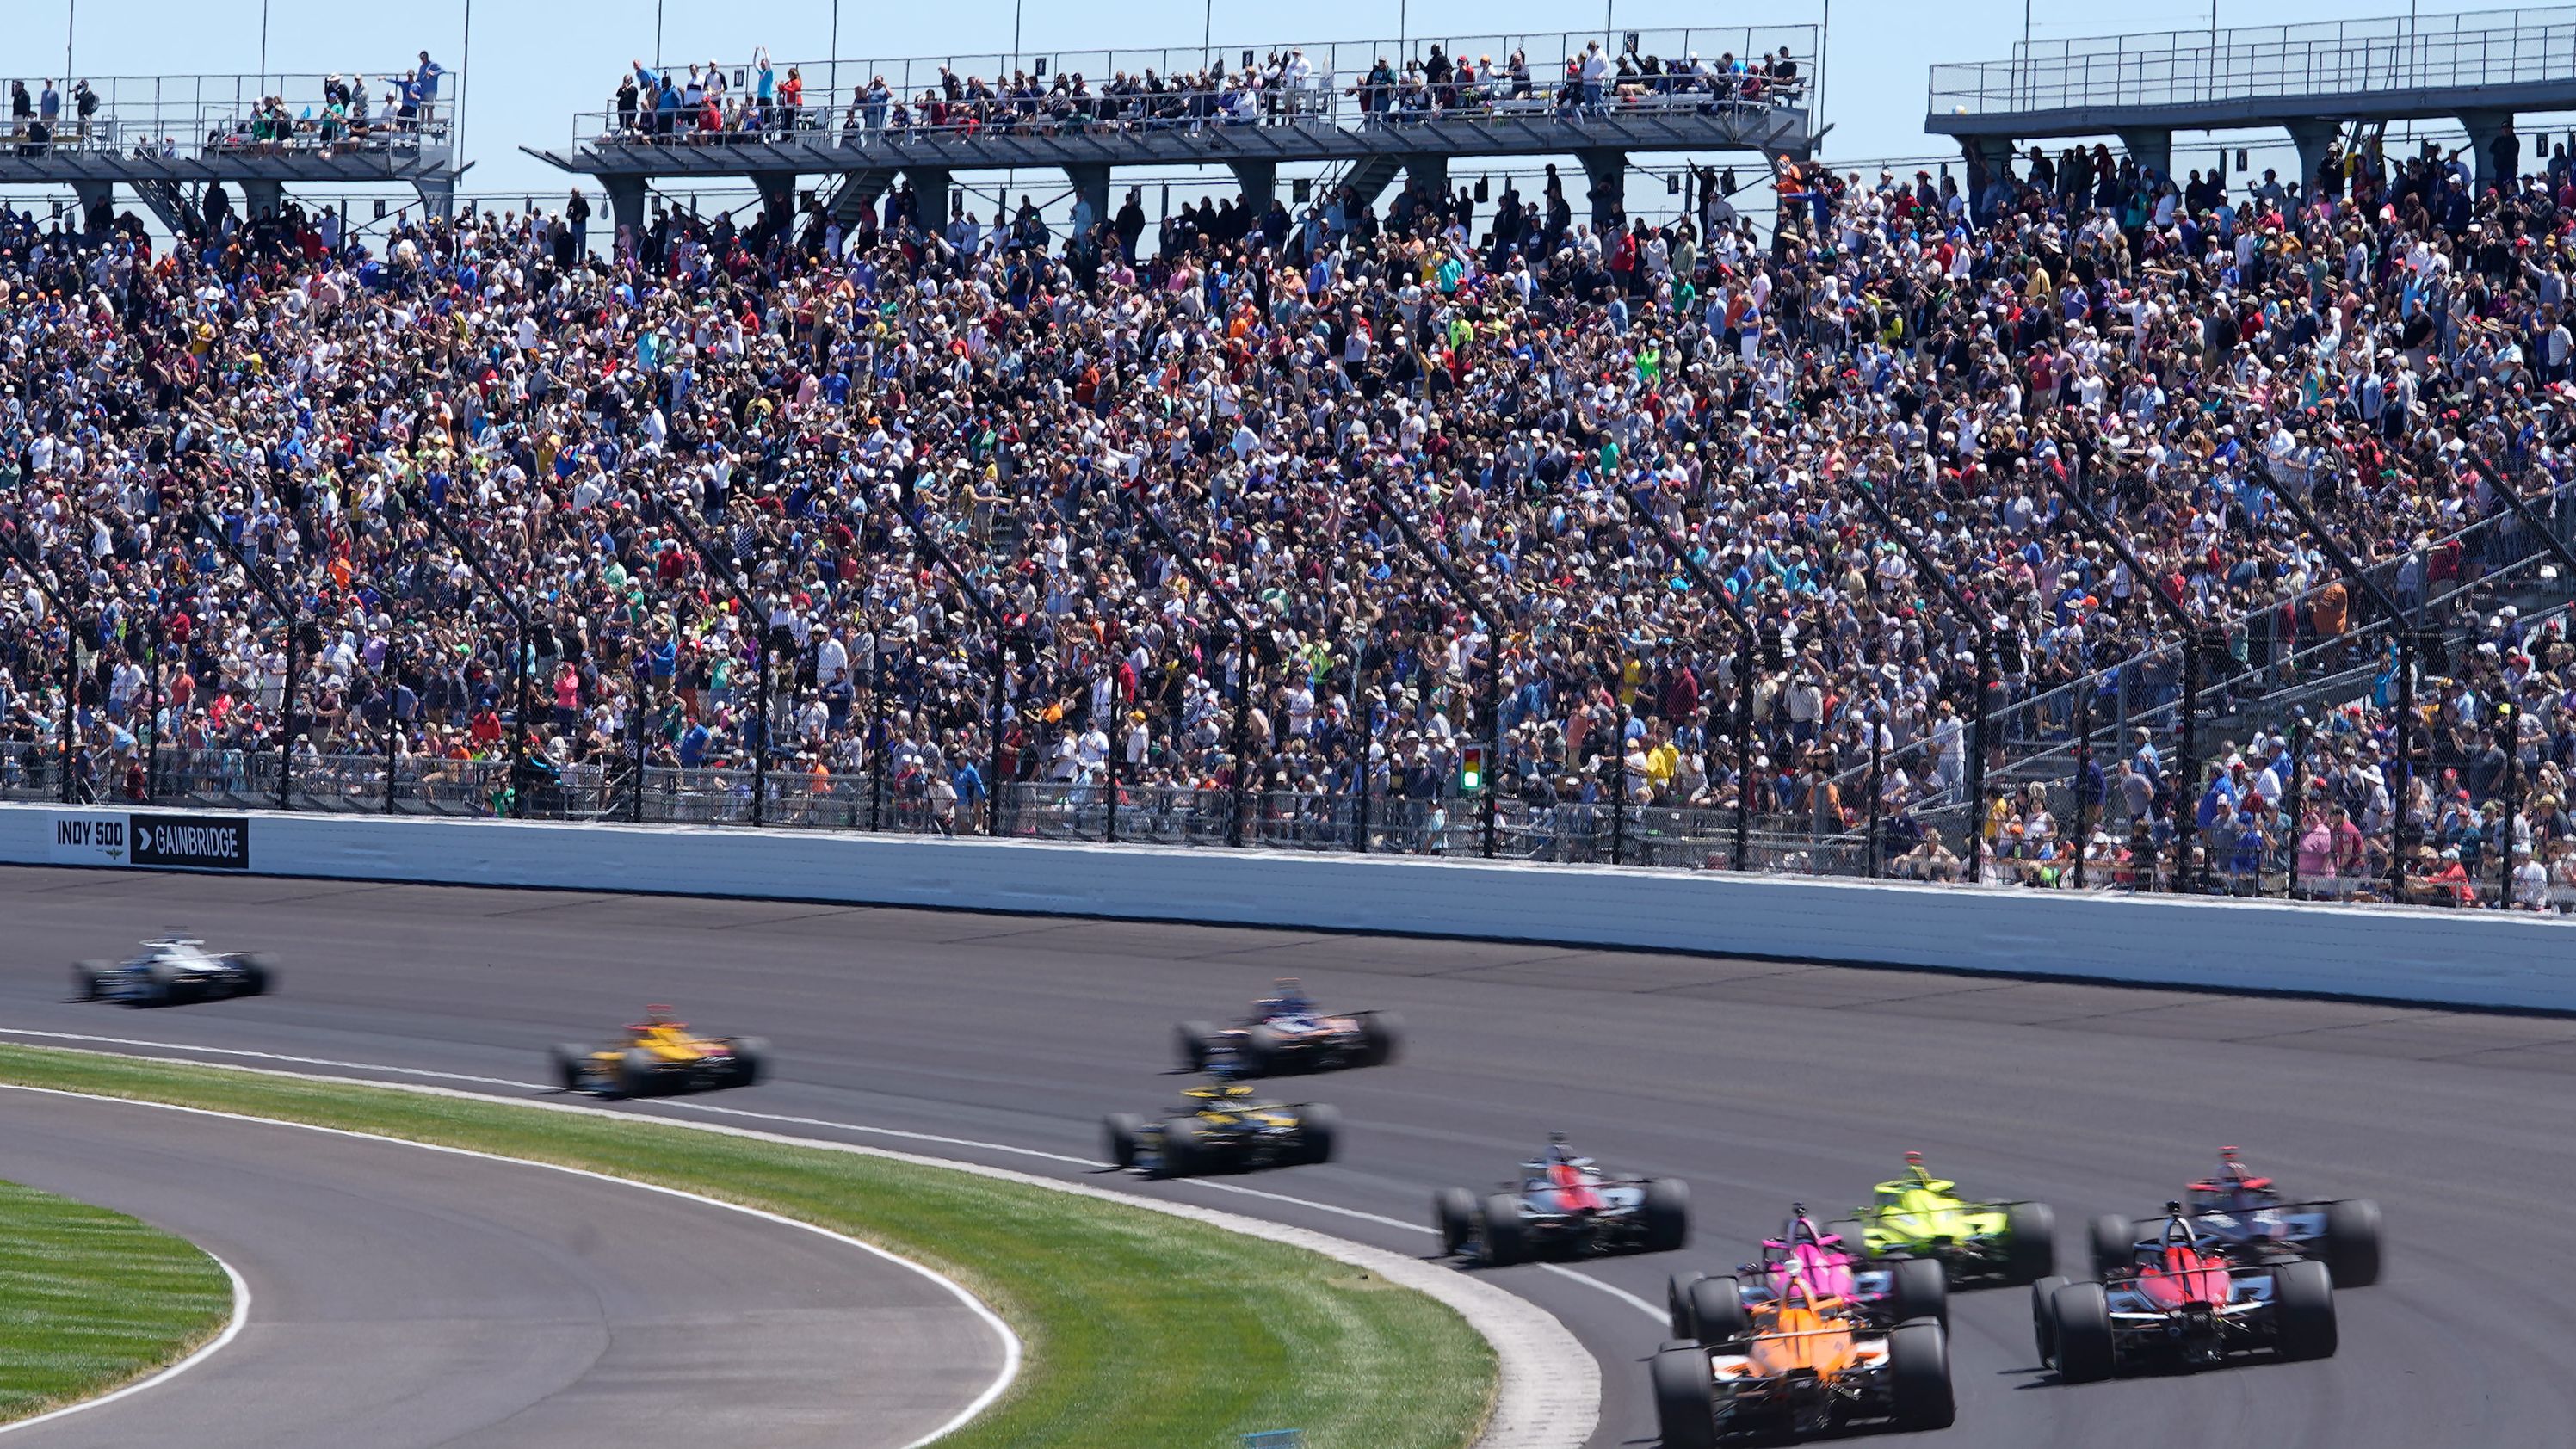 Fans watch the Indianapolis 500 auto race on Sunday. This year's event was billed as the most-attended sporting event since the pandemic's start, with the 135,000 available tickets quickly selling out.